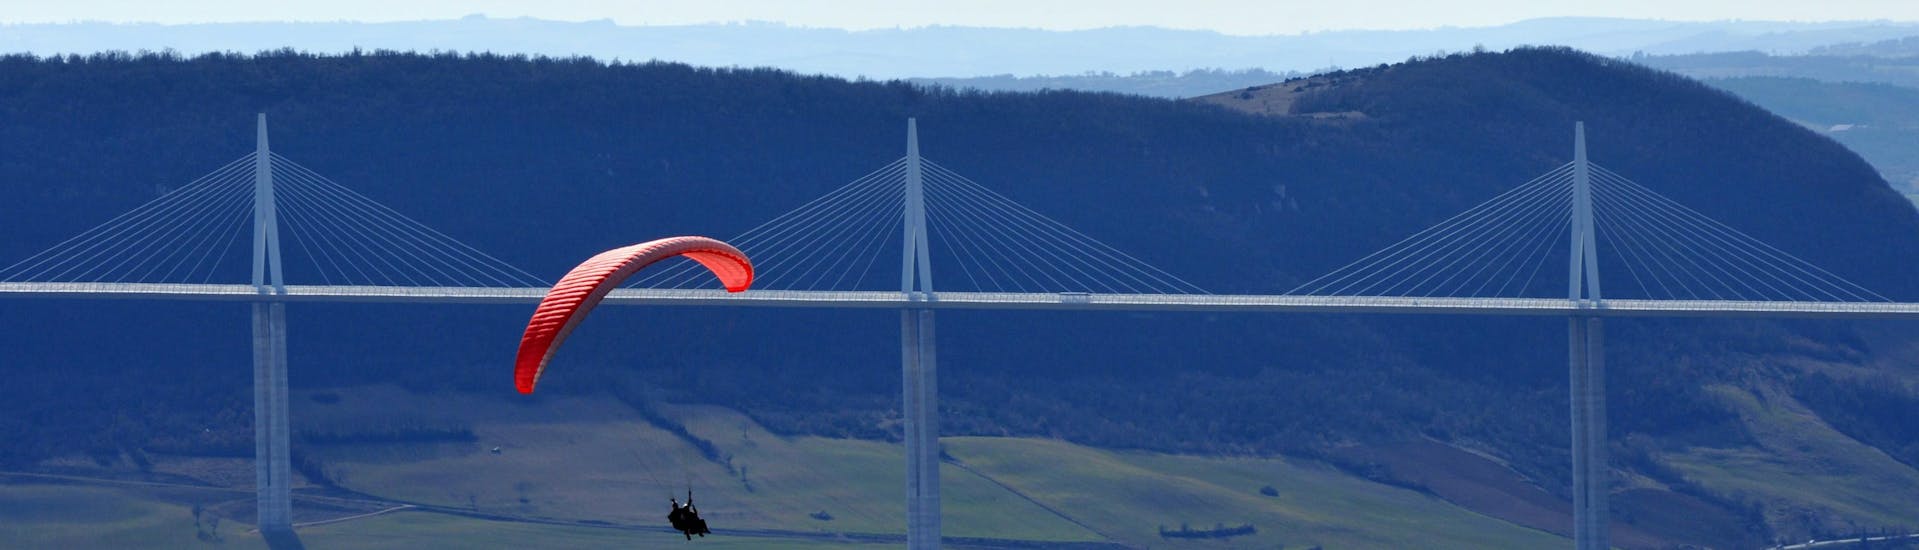 A paragliding pilot from Air Magic Parapente is doing a Tandem Paragliding Flight in front of the Millau Viaduct.